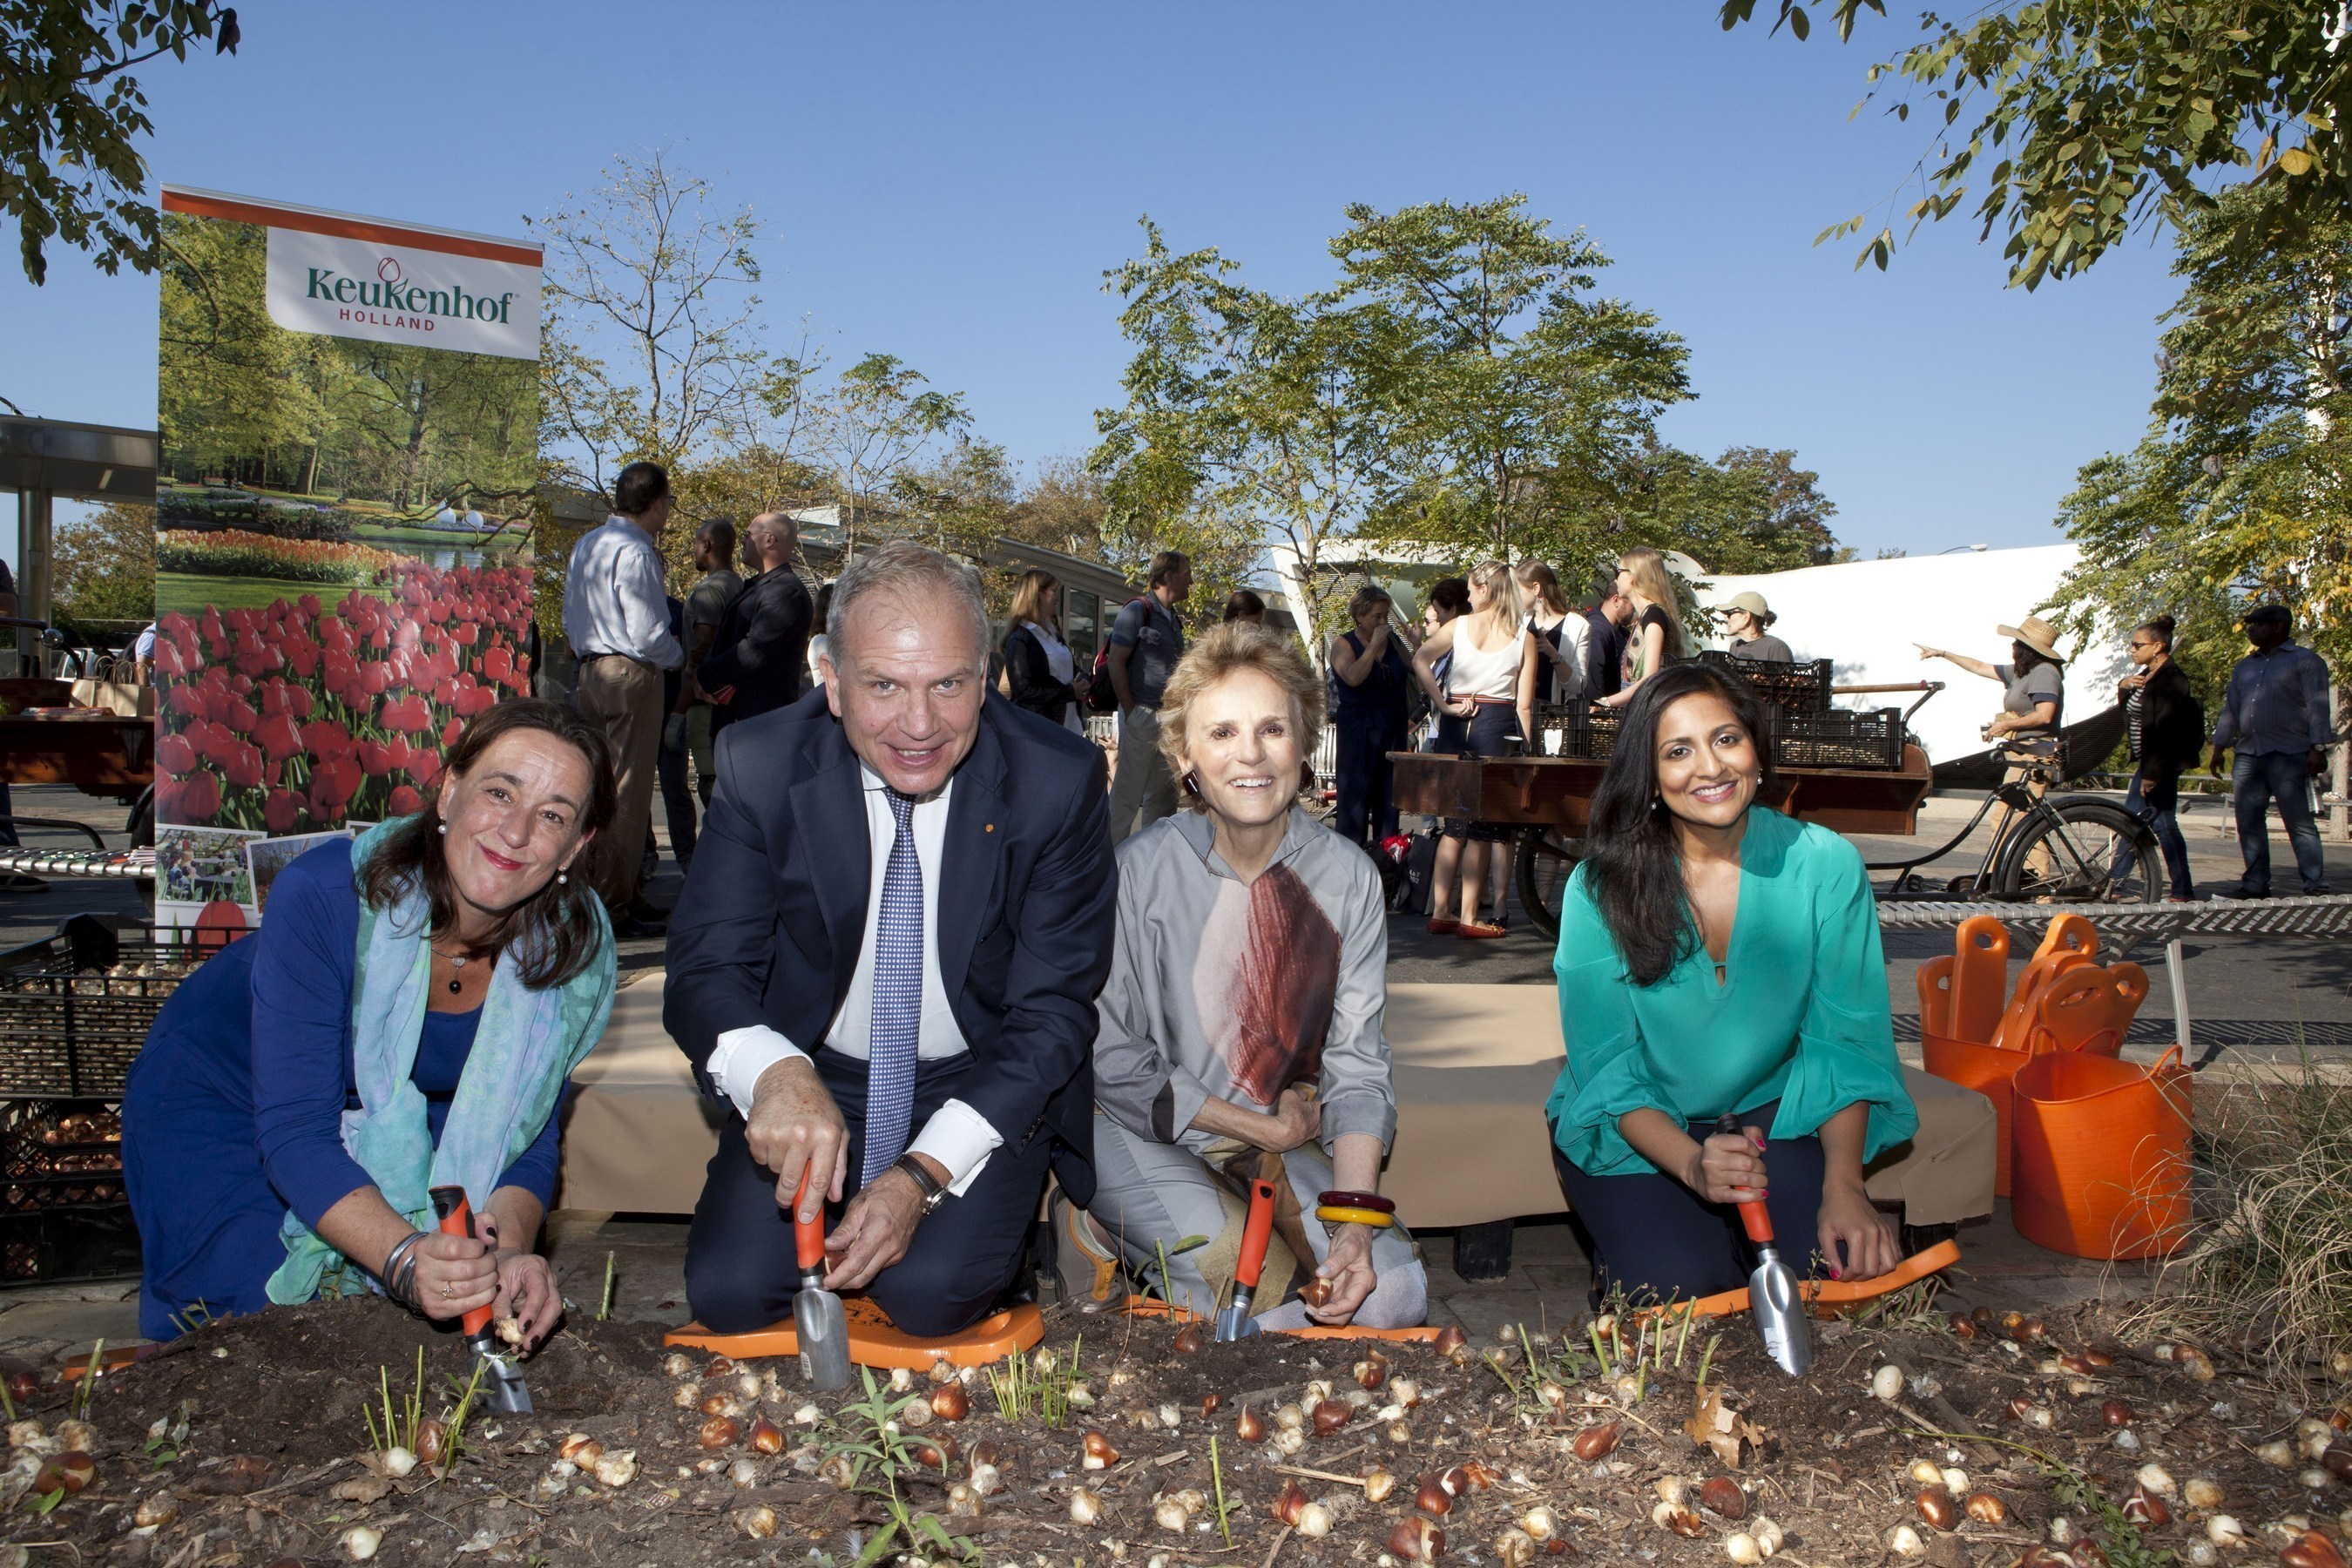 Annemarie Gerards (PR Keukenhof), Dolph Hogewoning (Consul General), Warrie Price (President Battery Conservancy) and Rosina Shiliwala (Director Holland Marketing USA) planted the first tulip bulbs donated by Keukenhof for a flower display at The Battery New York. (PRNewsFoto/Keukenhof)